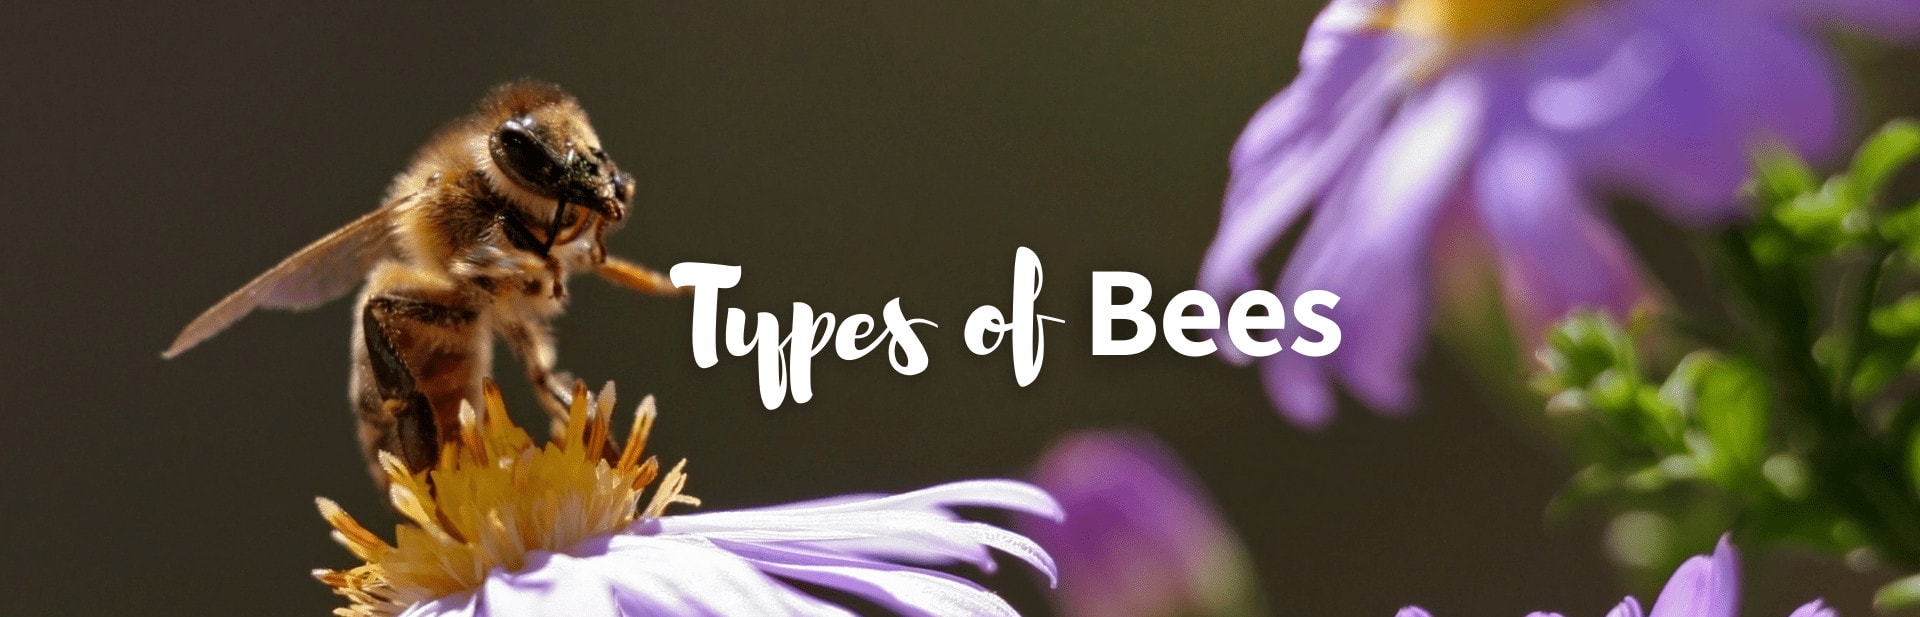 16+ Different Types Of Bees: Field Guide Identification with Photo, Facts and More